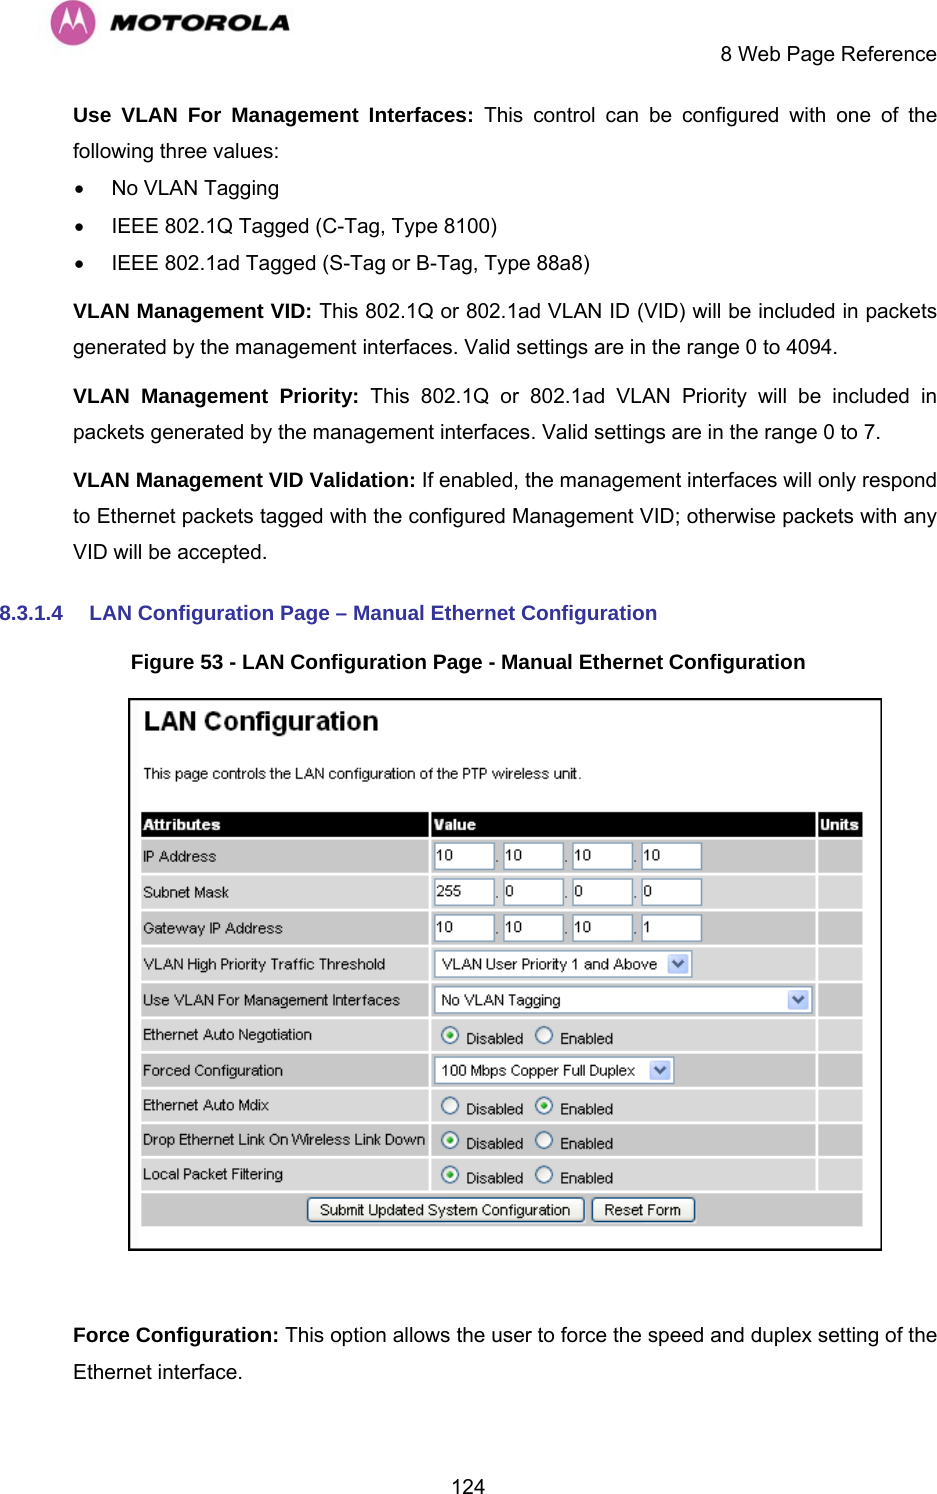     8 Web Page Reference  124Use VLAN For Management Interfaces: This control can be configured with one of the following three values: •  No VLAN Tagging •  IEEE 802.1Q Tagged (C-Tag, Type 8100) •  IEEE 802.1ad Tagged (S-Tag or B-Tag, Type 88a8) VLAN Management VID: This 802.1Q or 802.1ad VLAN ID (VID) will be included in packets generated by the management interfaces. Valid settings are in the range 0 to 4094. VLAN Management Priority: This 802.1Q or 802.1ad VLAN Priority will be included in packets generated by the management interfaces. Valid settings are in the range 0 to 7. VLAN Management VID Validation: If enabled, the management interfaces will only respond to Ethernet packets tagged with the configured Management VID; otherwise packets with any VID will be accepted. 8.3.1.4  LAN Configuration Page – Manual Ethernet Configuration Figure 53 - LAN Configuration Page - Manual Ethernet Configuration   Force Configuration: This option allows the user to force the speed and duplex setting of the Ethernet interface. 